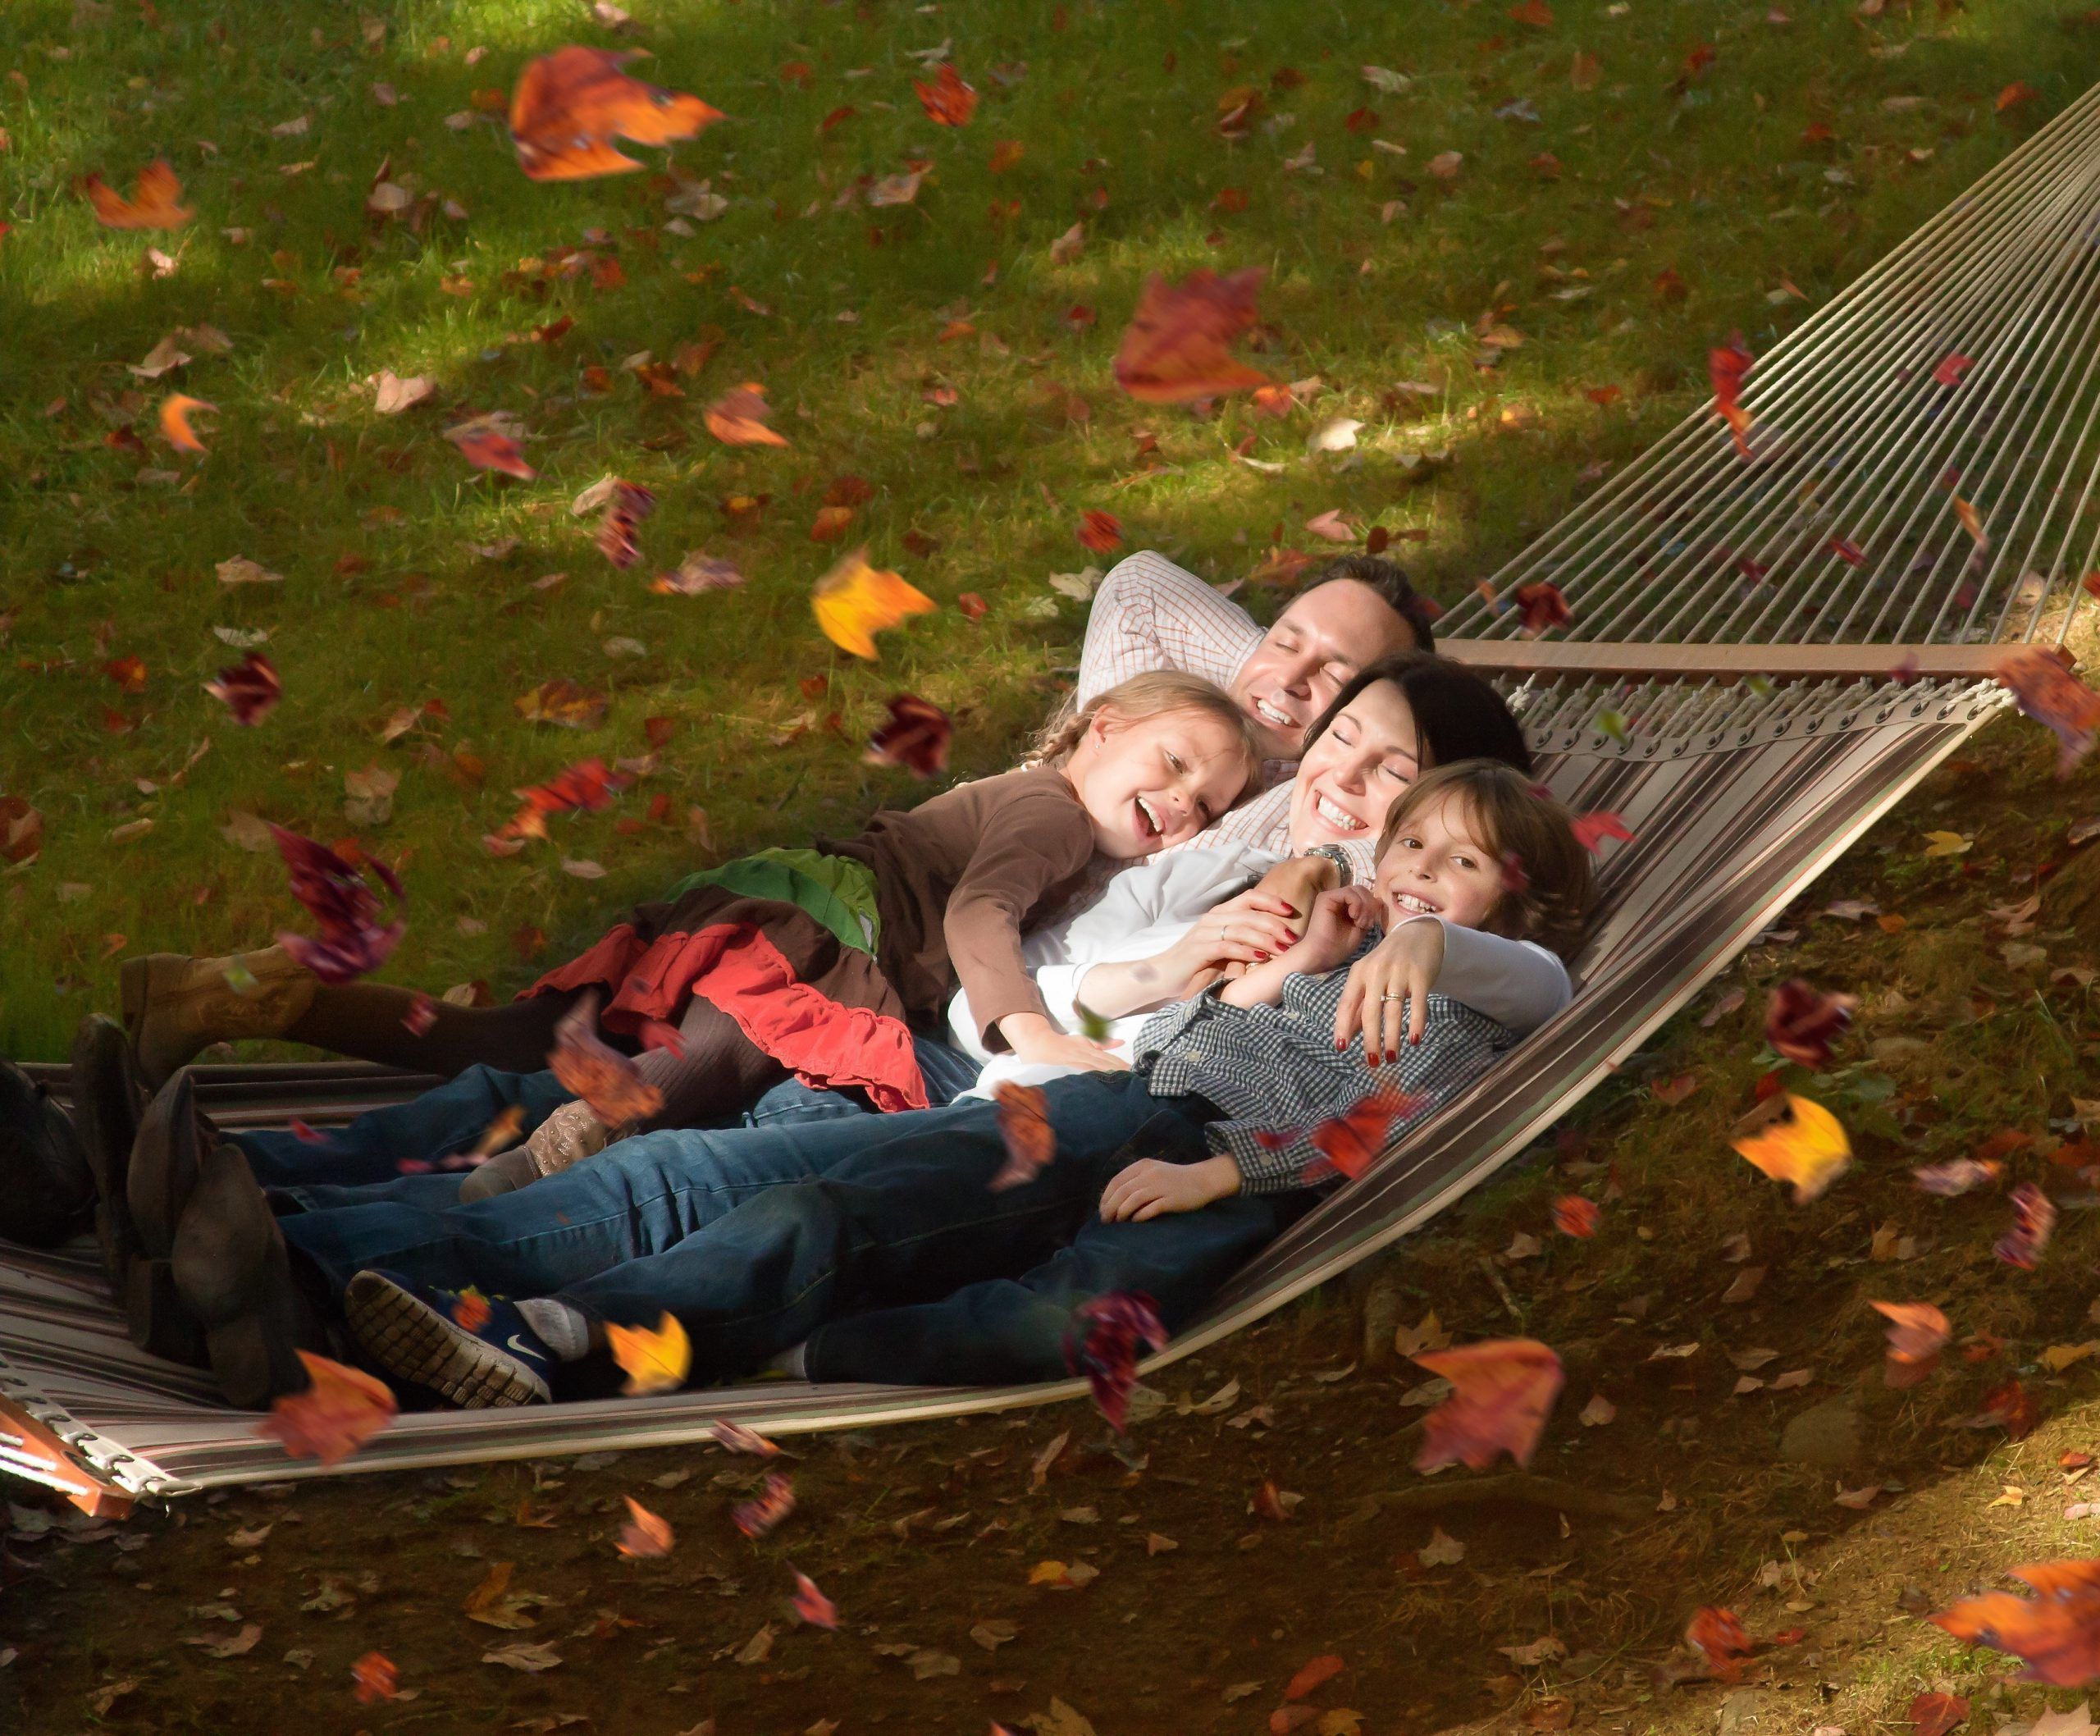 Mom, Dad and 2 kids laughing while swinging in a hammock with fall leaves swirling in the wind Mom, Dad and 2 kids laughing while swinging in a hammock with fall leaves swirling in the wind